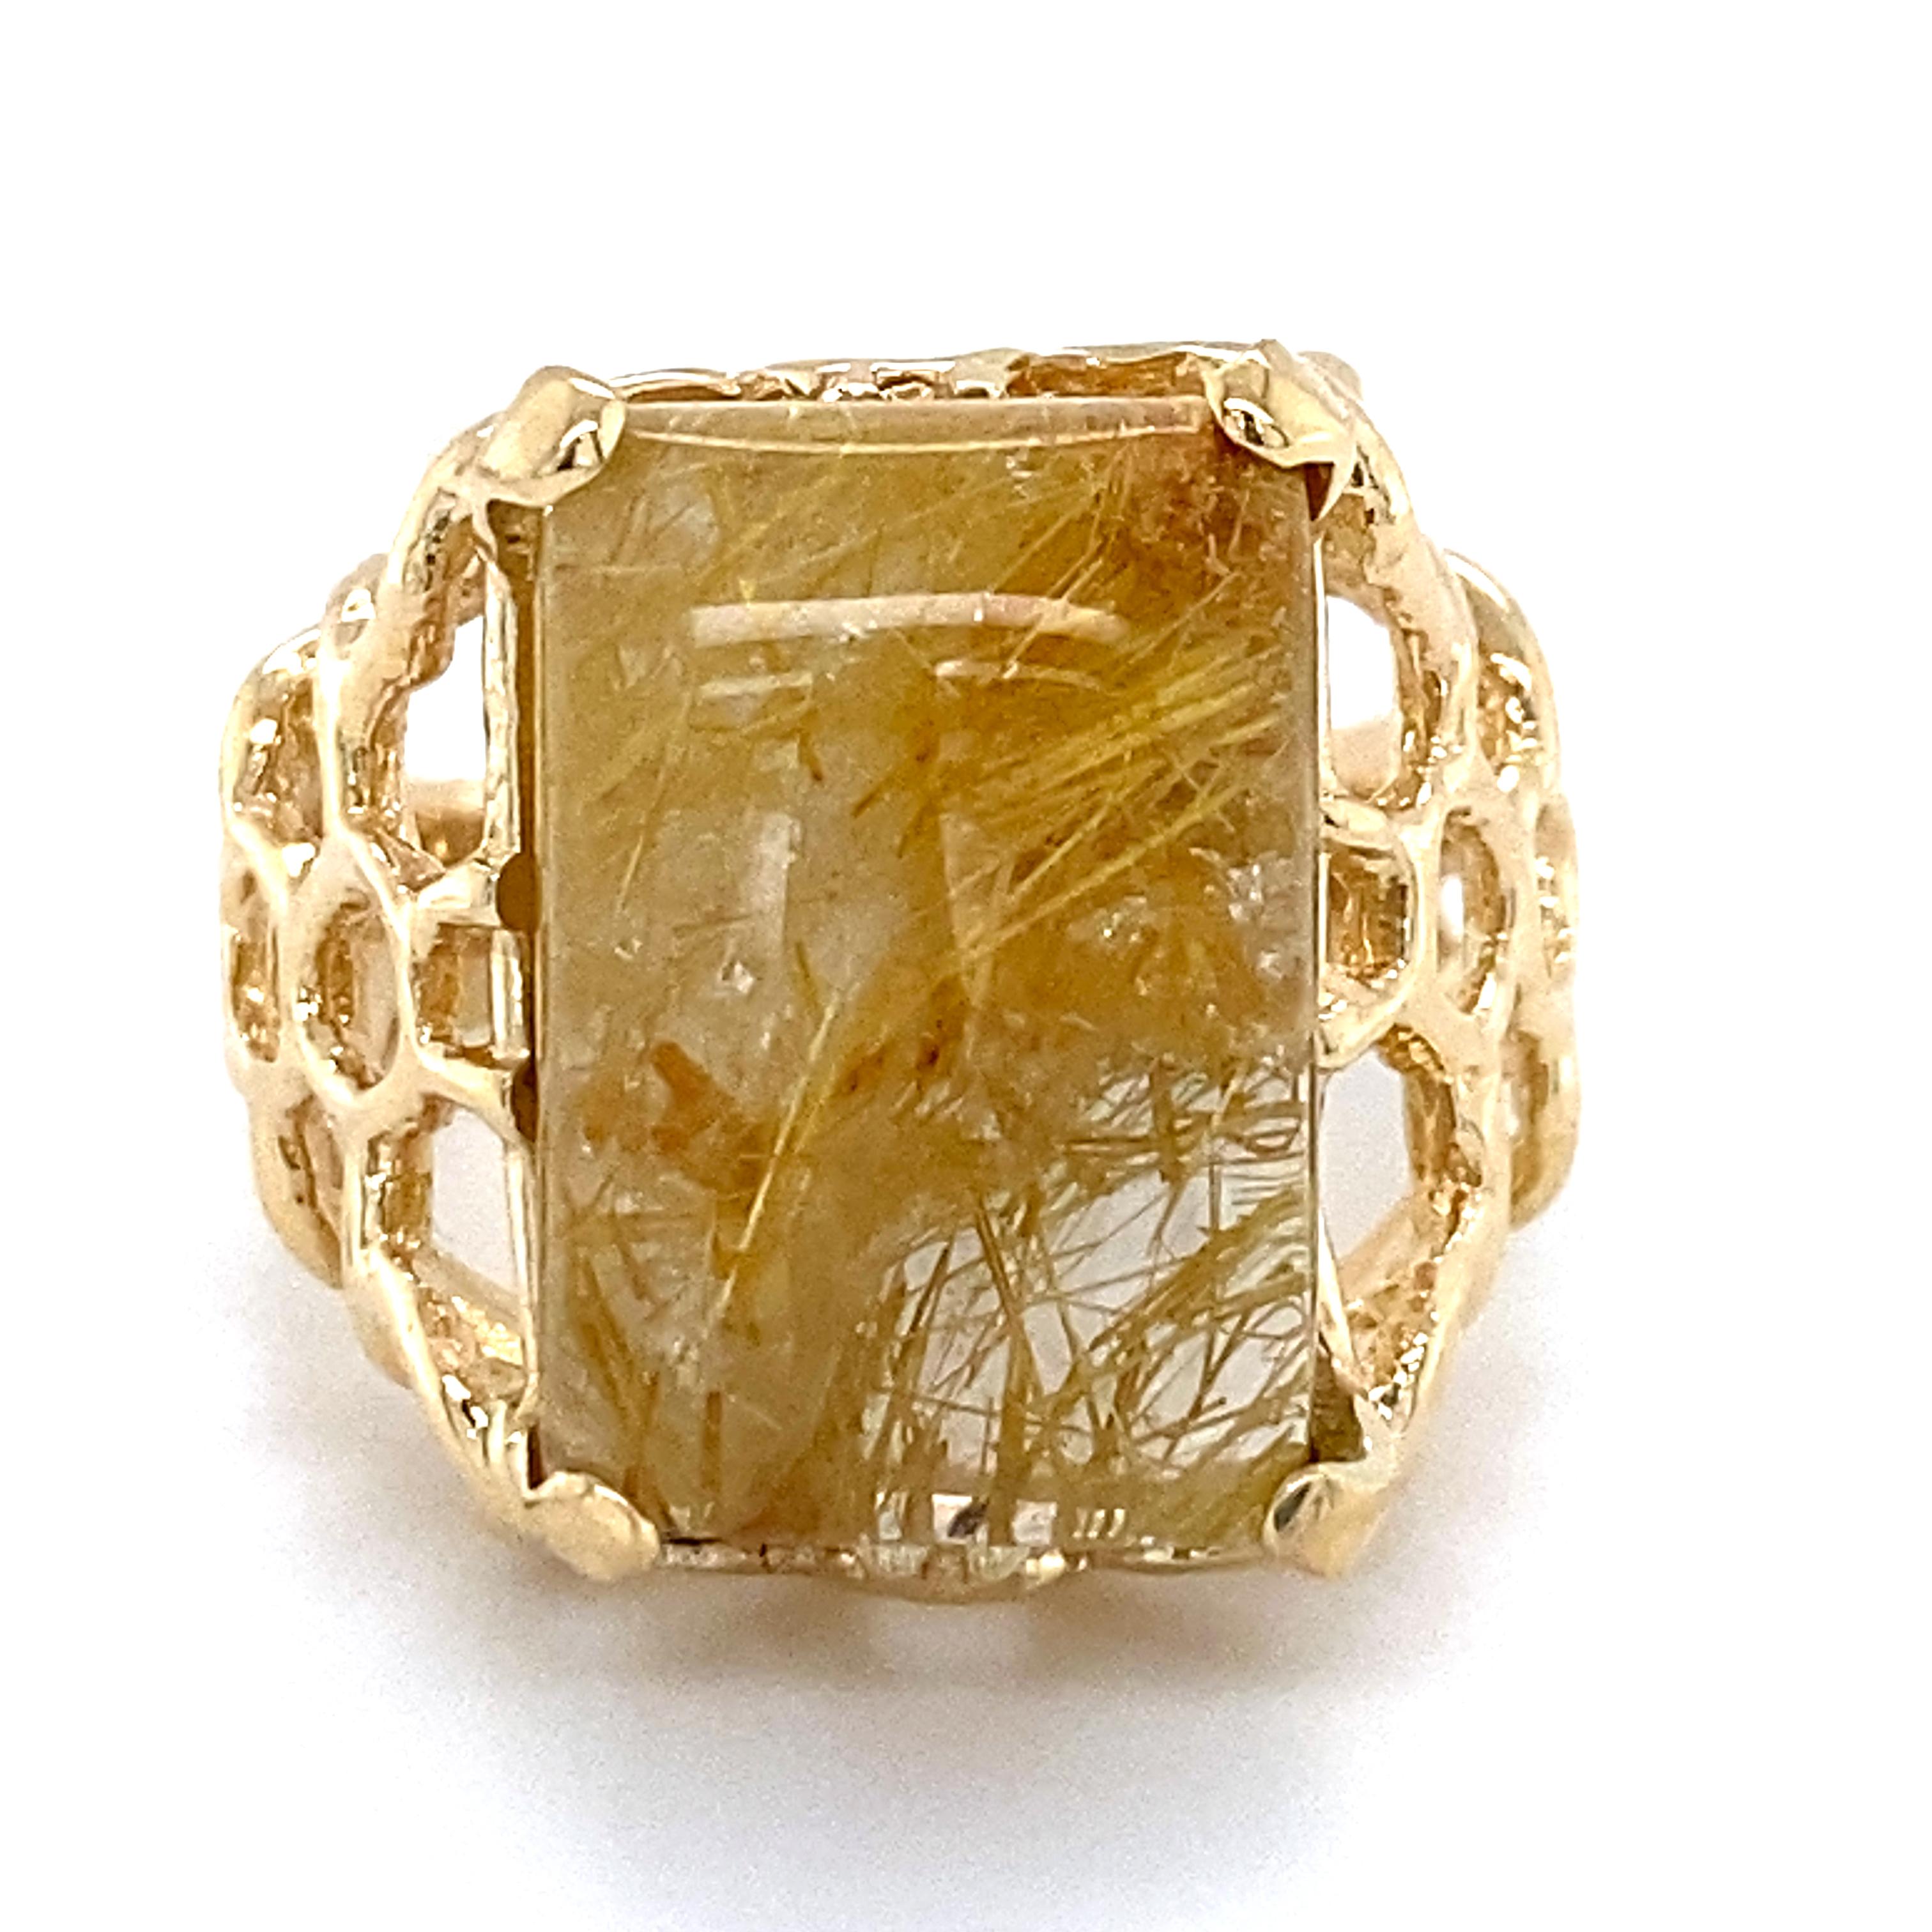 This unusual ring, probably made in the 1980s or 1990s, features wide shoulders and an elevated platform  with an openwork pattern resembling scales or webbing.  

When it landed in our lap, it was set with a gacky lemon quartz.  We've got no